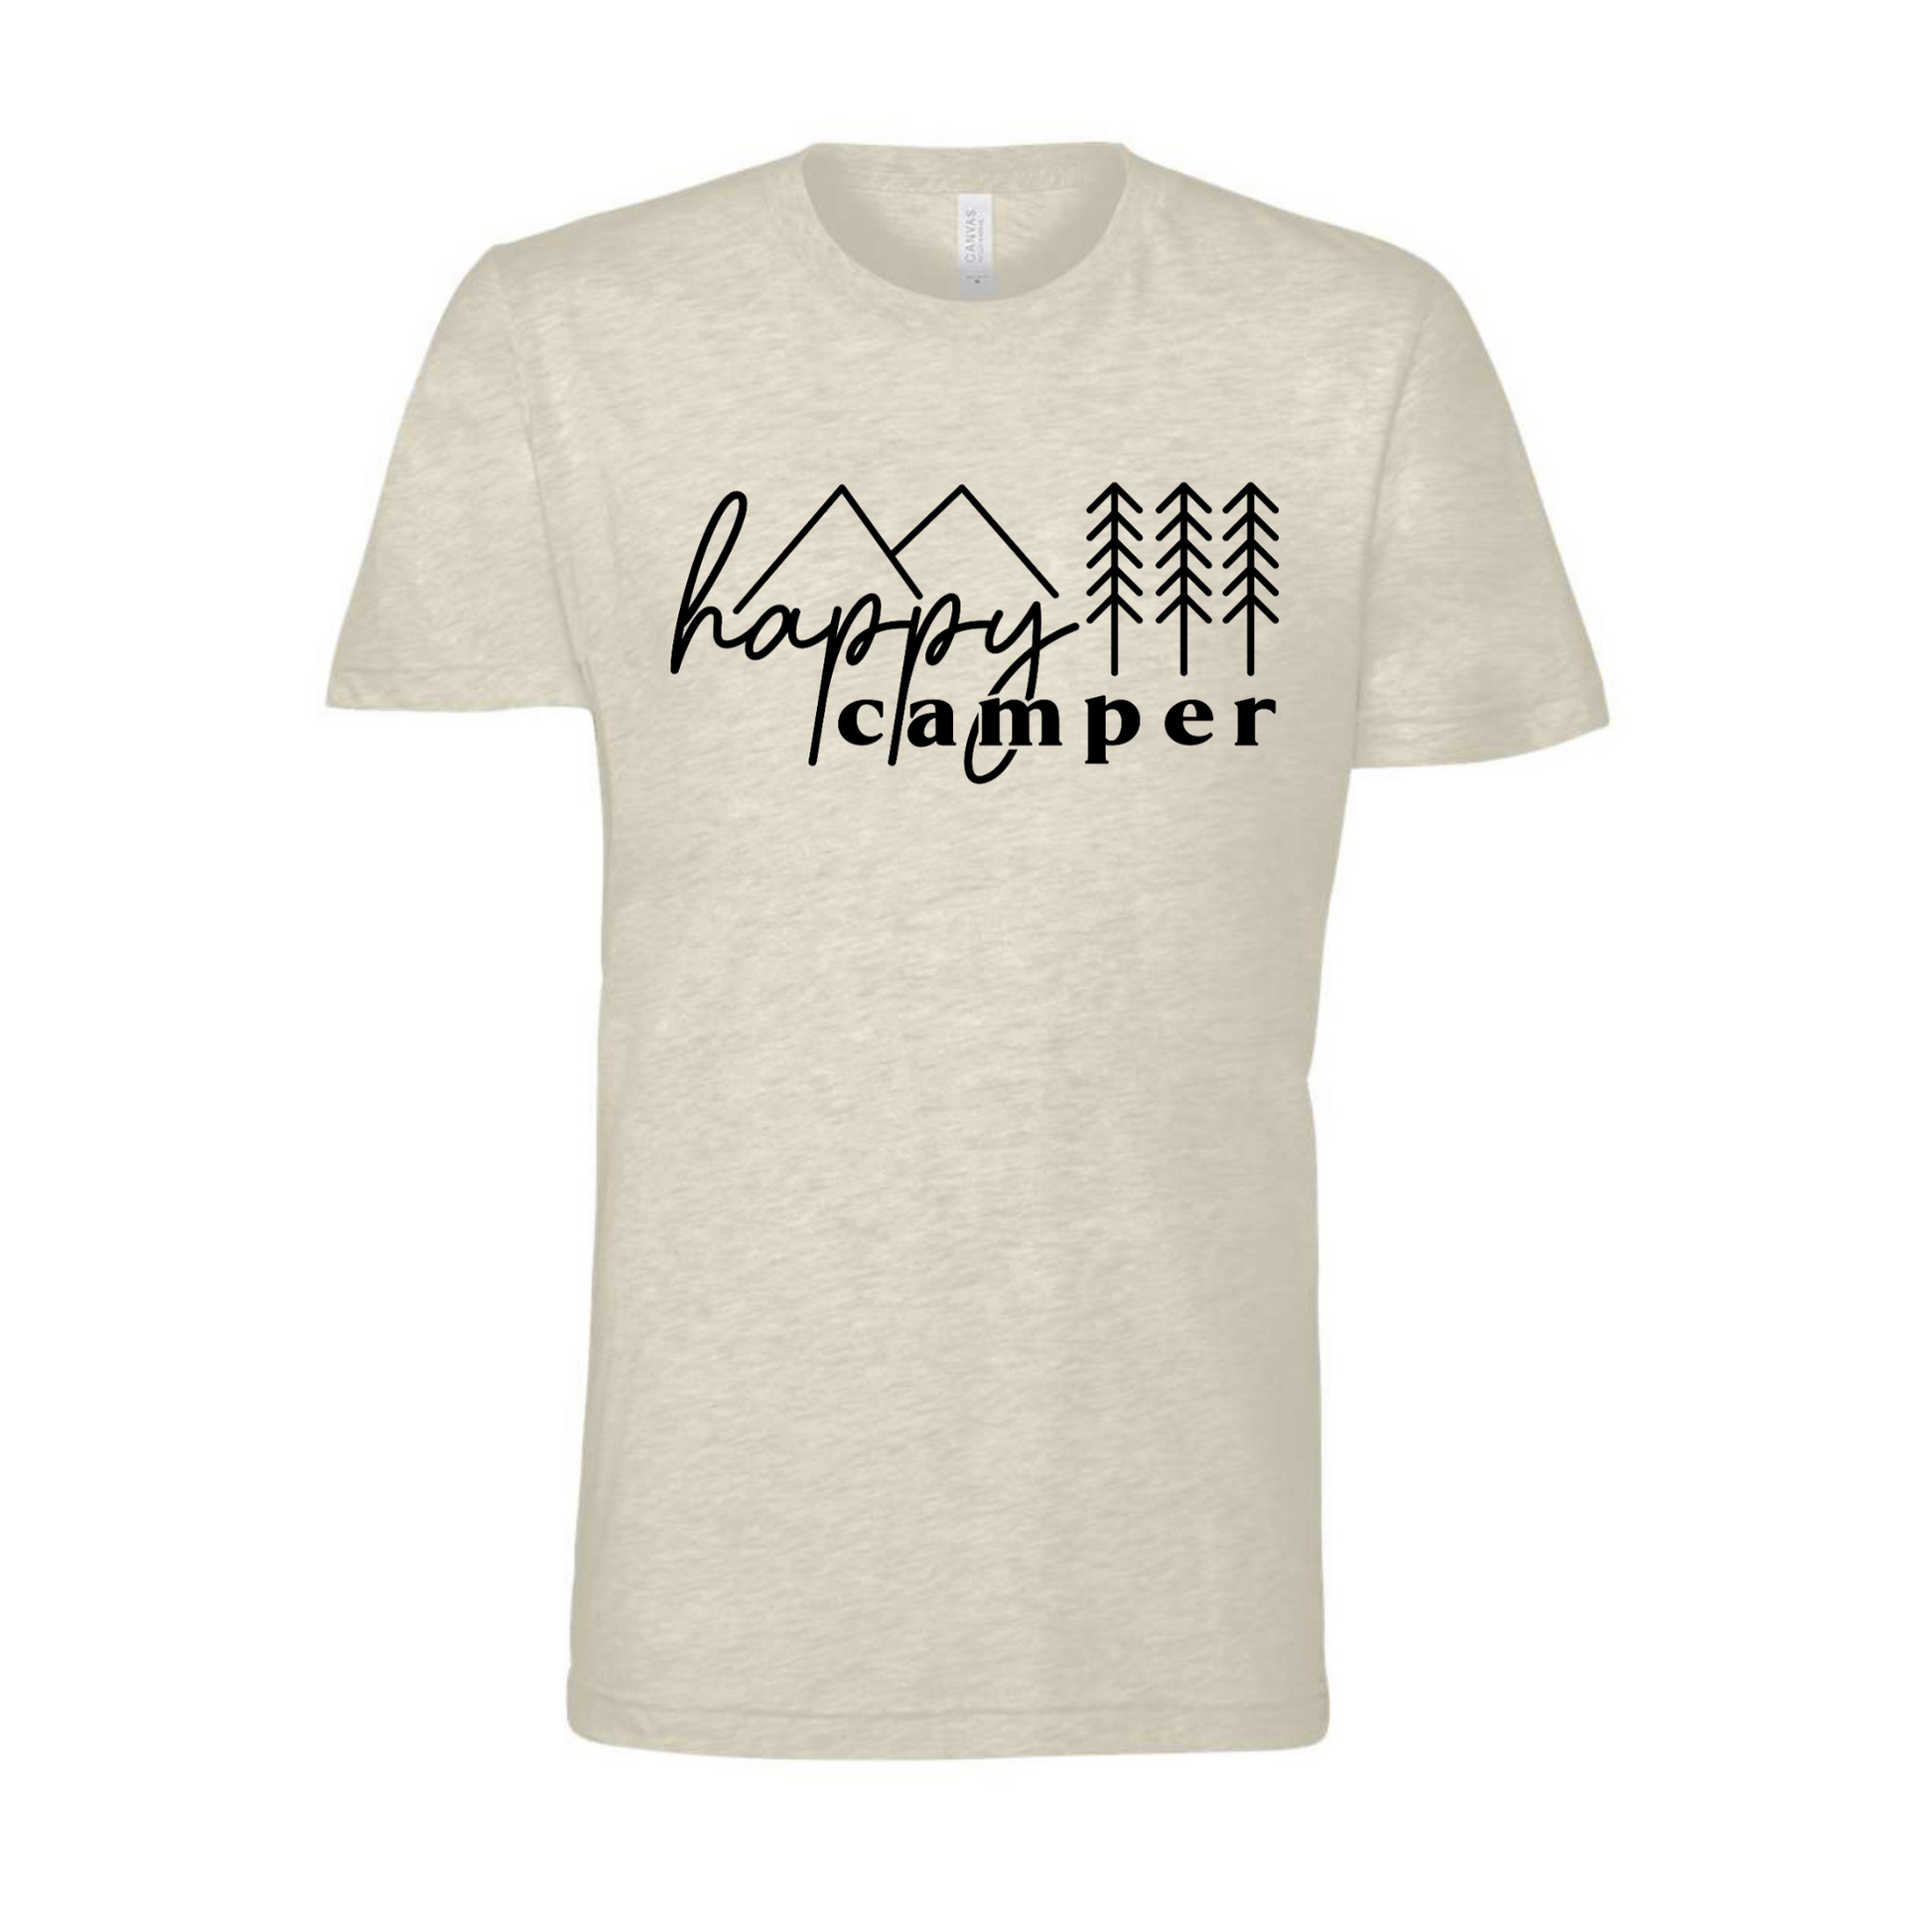 Happy Camper T-Shirt in Heather Oatmeal. The front has a cursive font "happy" with "camper" below it in a bold lowercase font. Two triangle mountains are above the word happy, and three pine trees are above the word camper. The design is in black. This is the front view of the shirt.